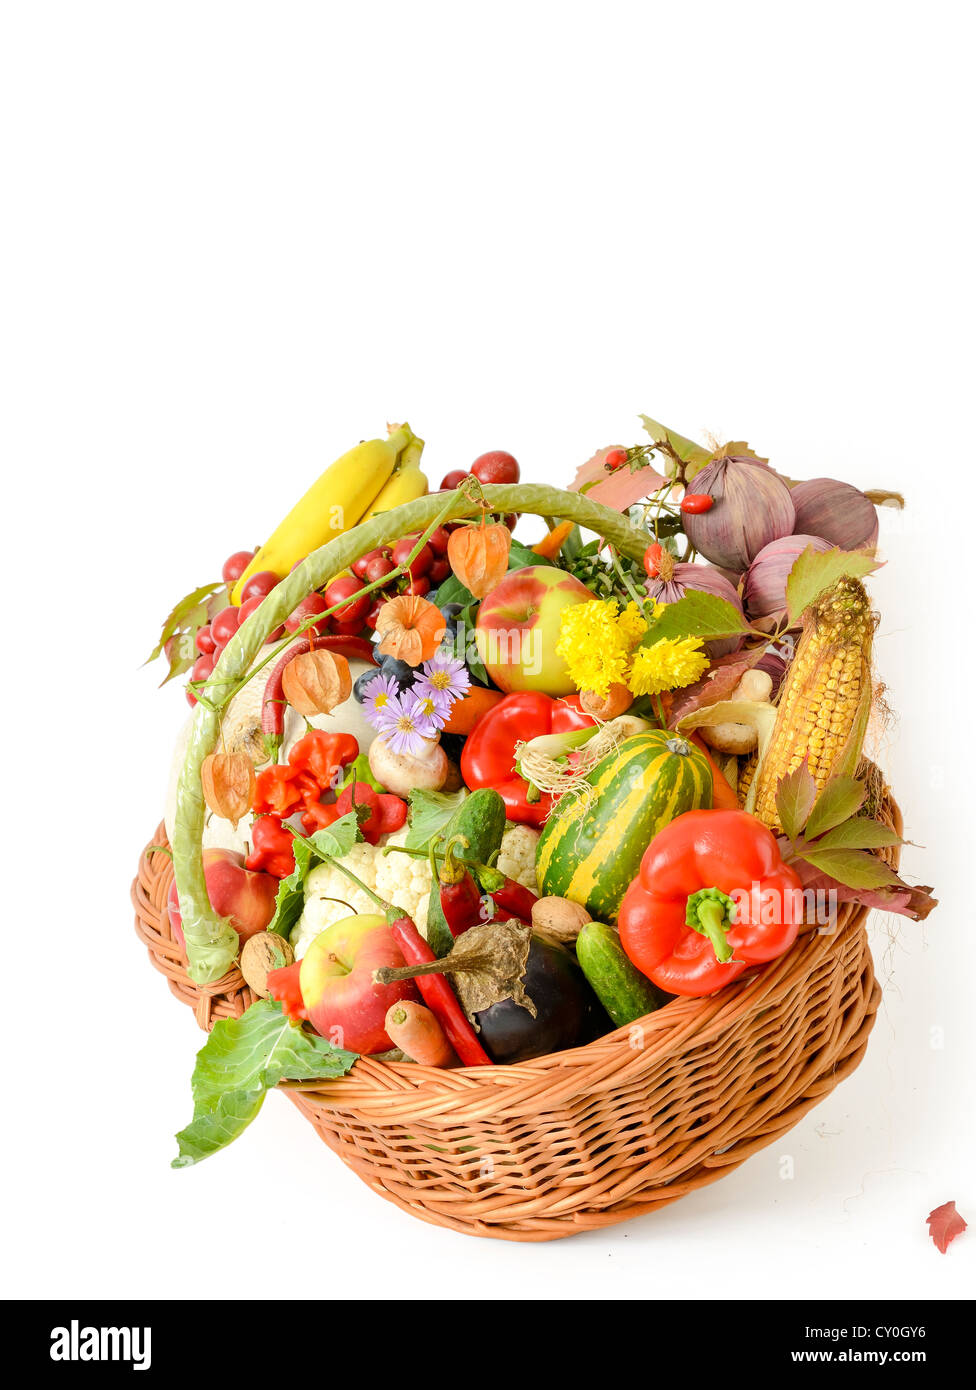 Variety of raw vegetables in wicker basket isolated on white background Stock Photo